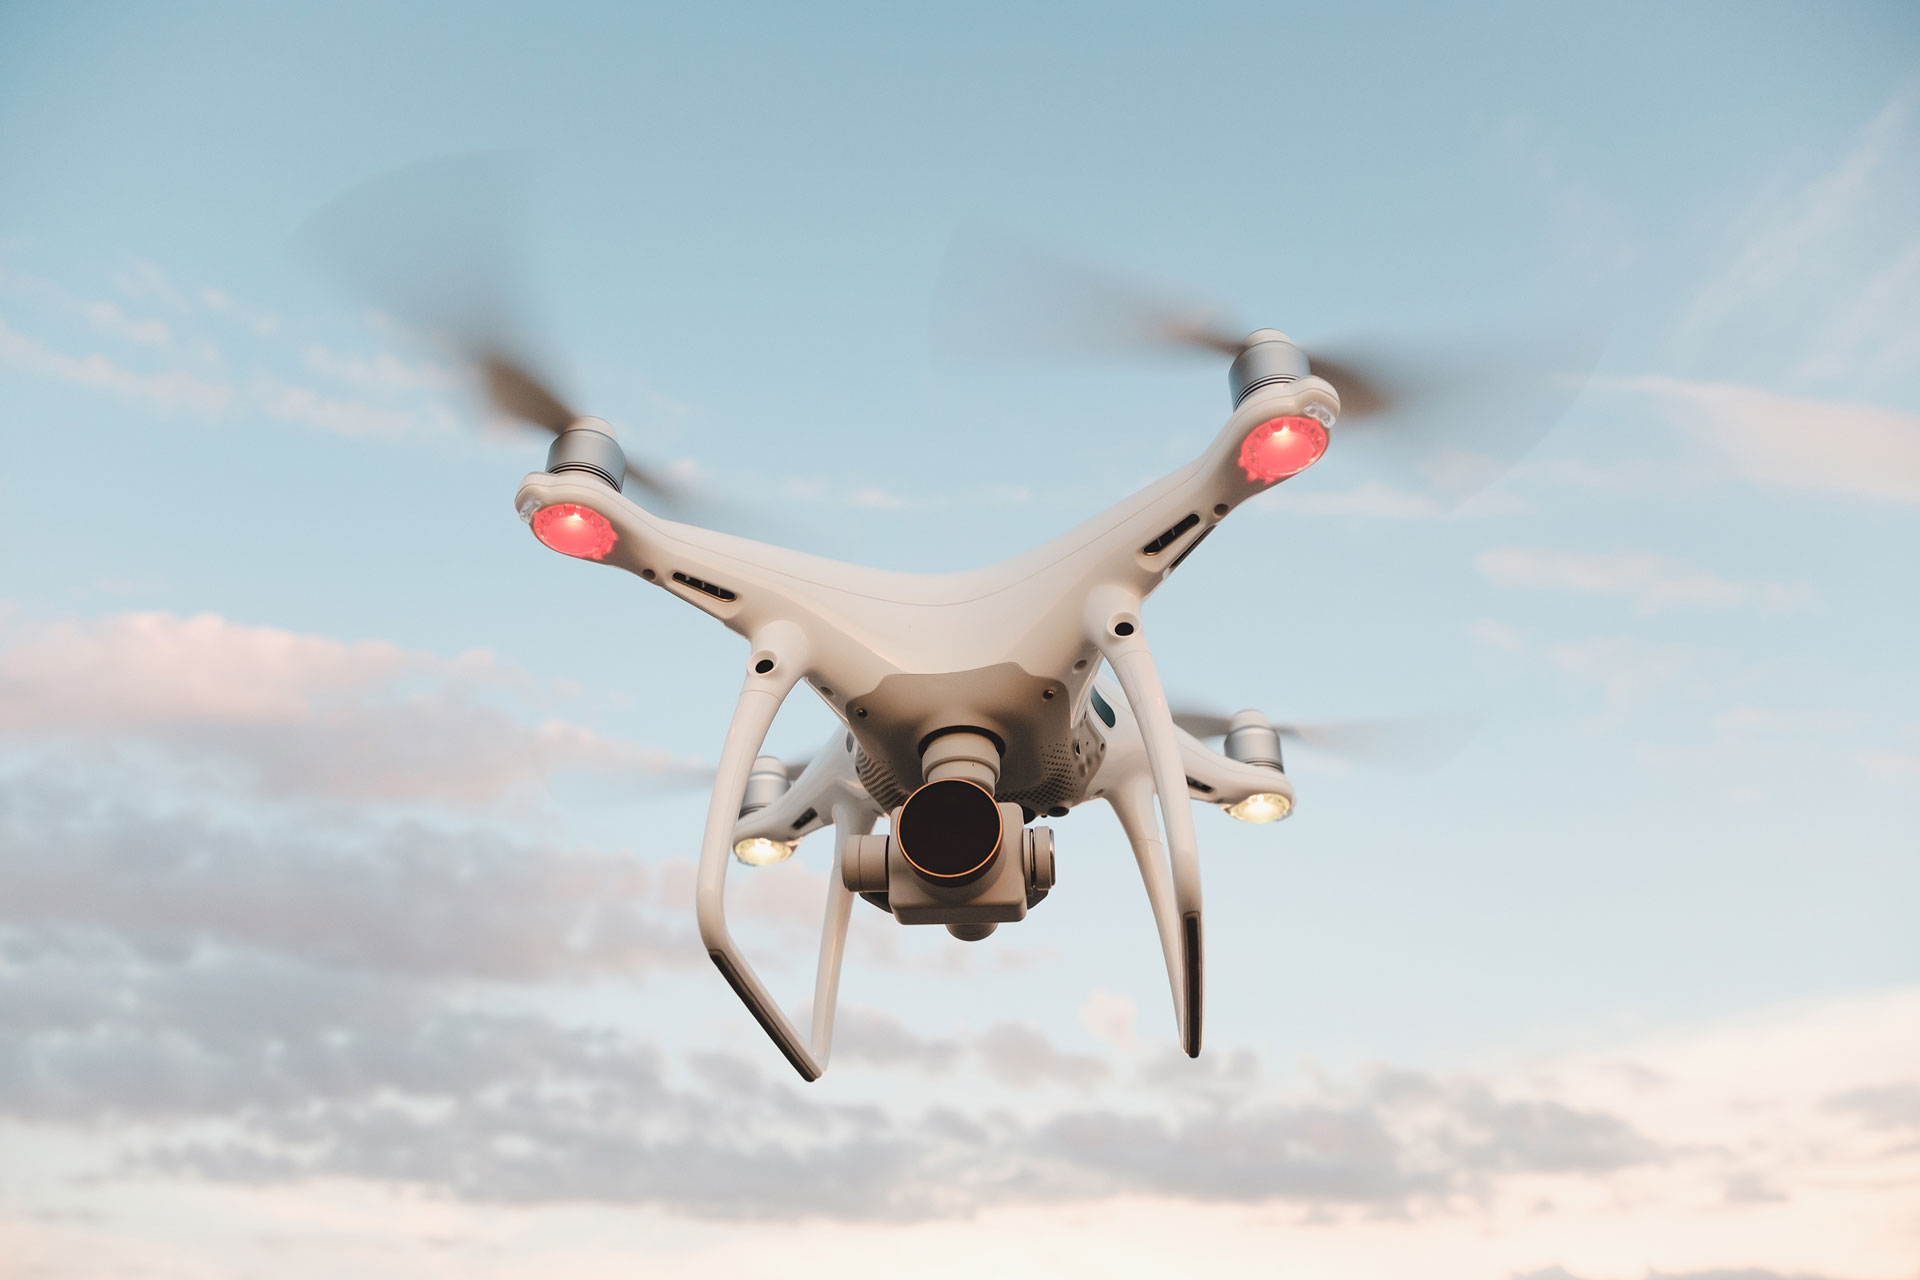 white-drone-hovering-in-a-bright-blue-sky-PMFRLG7.jpg